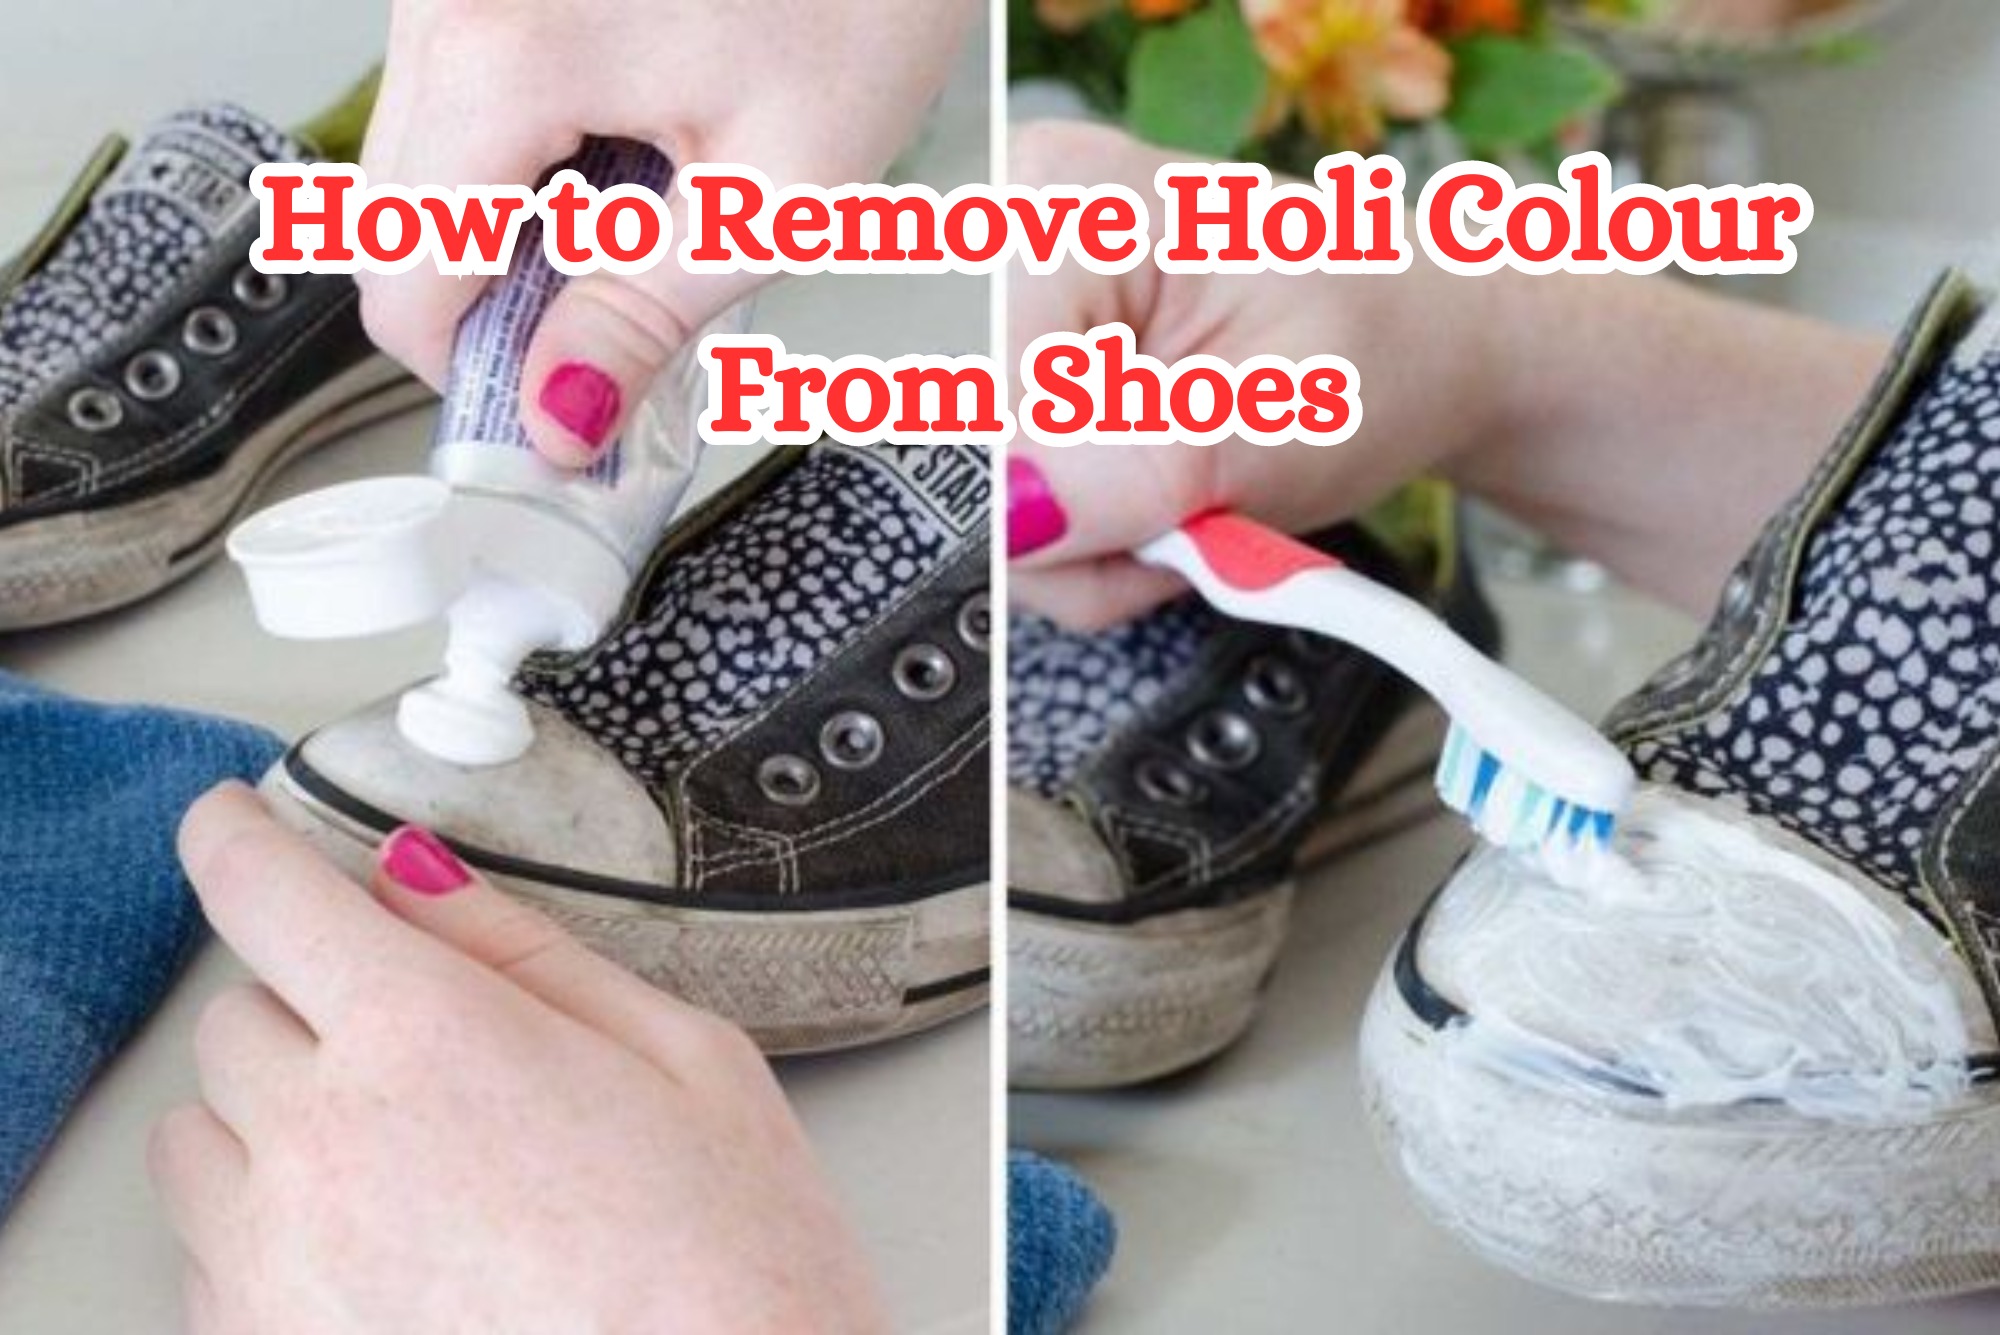 How to Remove Holi Colour From Shoes